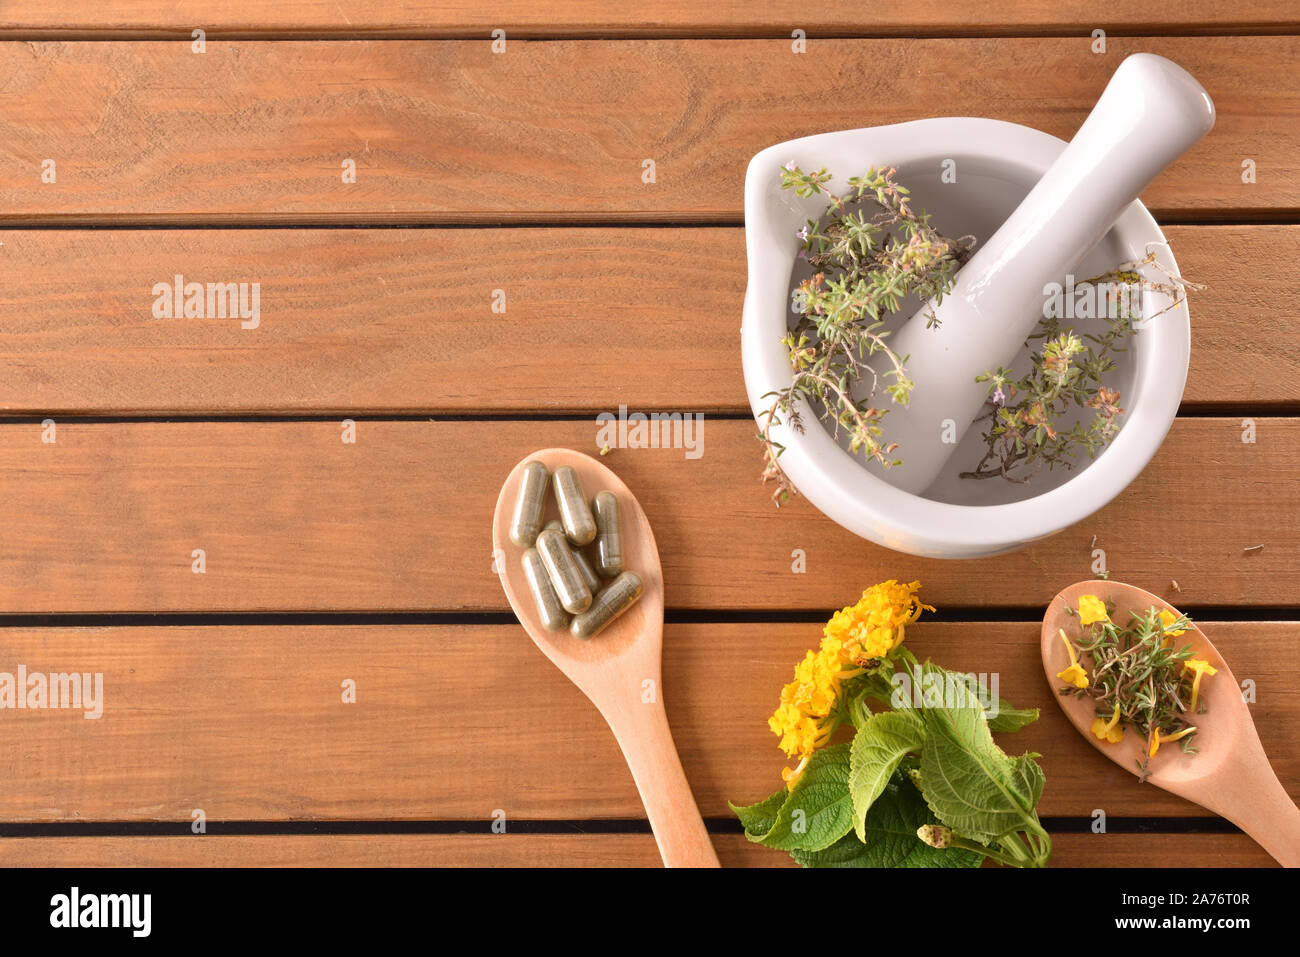 Homemade elaboration of natural medicines with capsules and mortar with plants on wooden table. Alternative natural medicine concept. Top view. Horizo Stock Photo